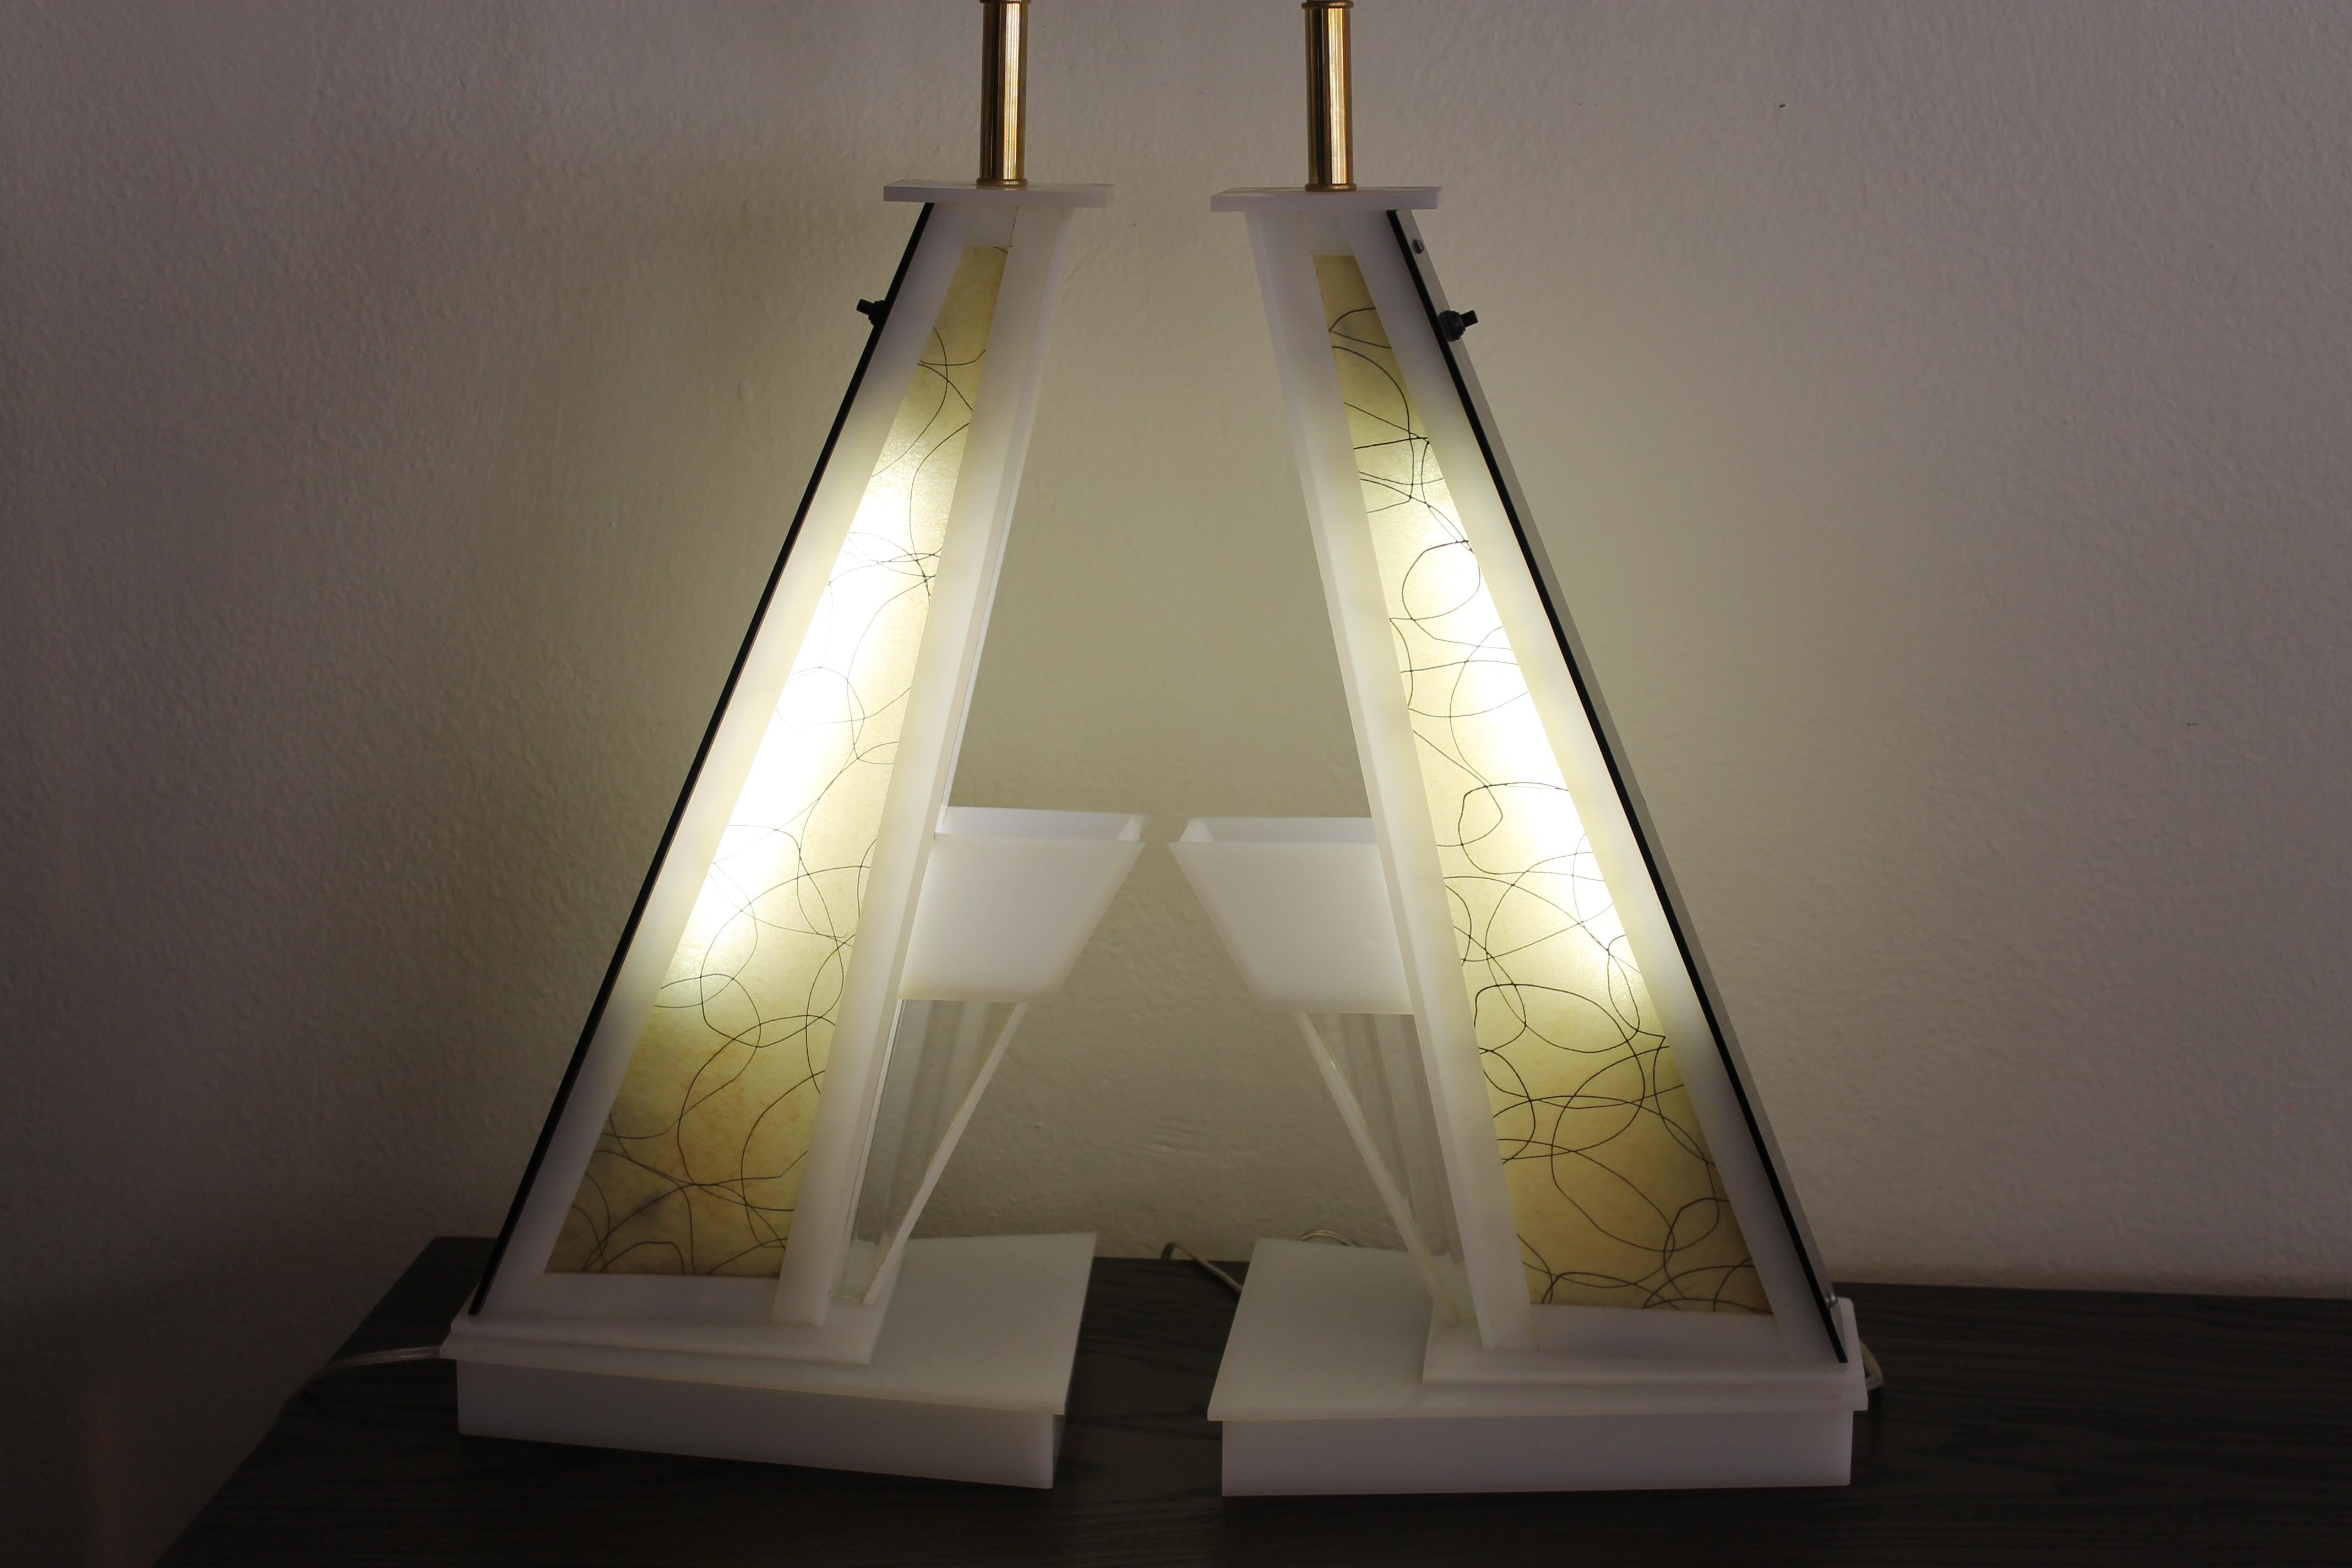 Pair of angular lucite table lamps by the Moss lighting company. Lamps have a switch which lights up the inside portions in addition to the switch on the sockets.  Lamps measure 9